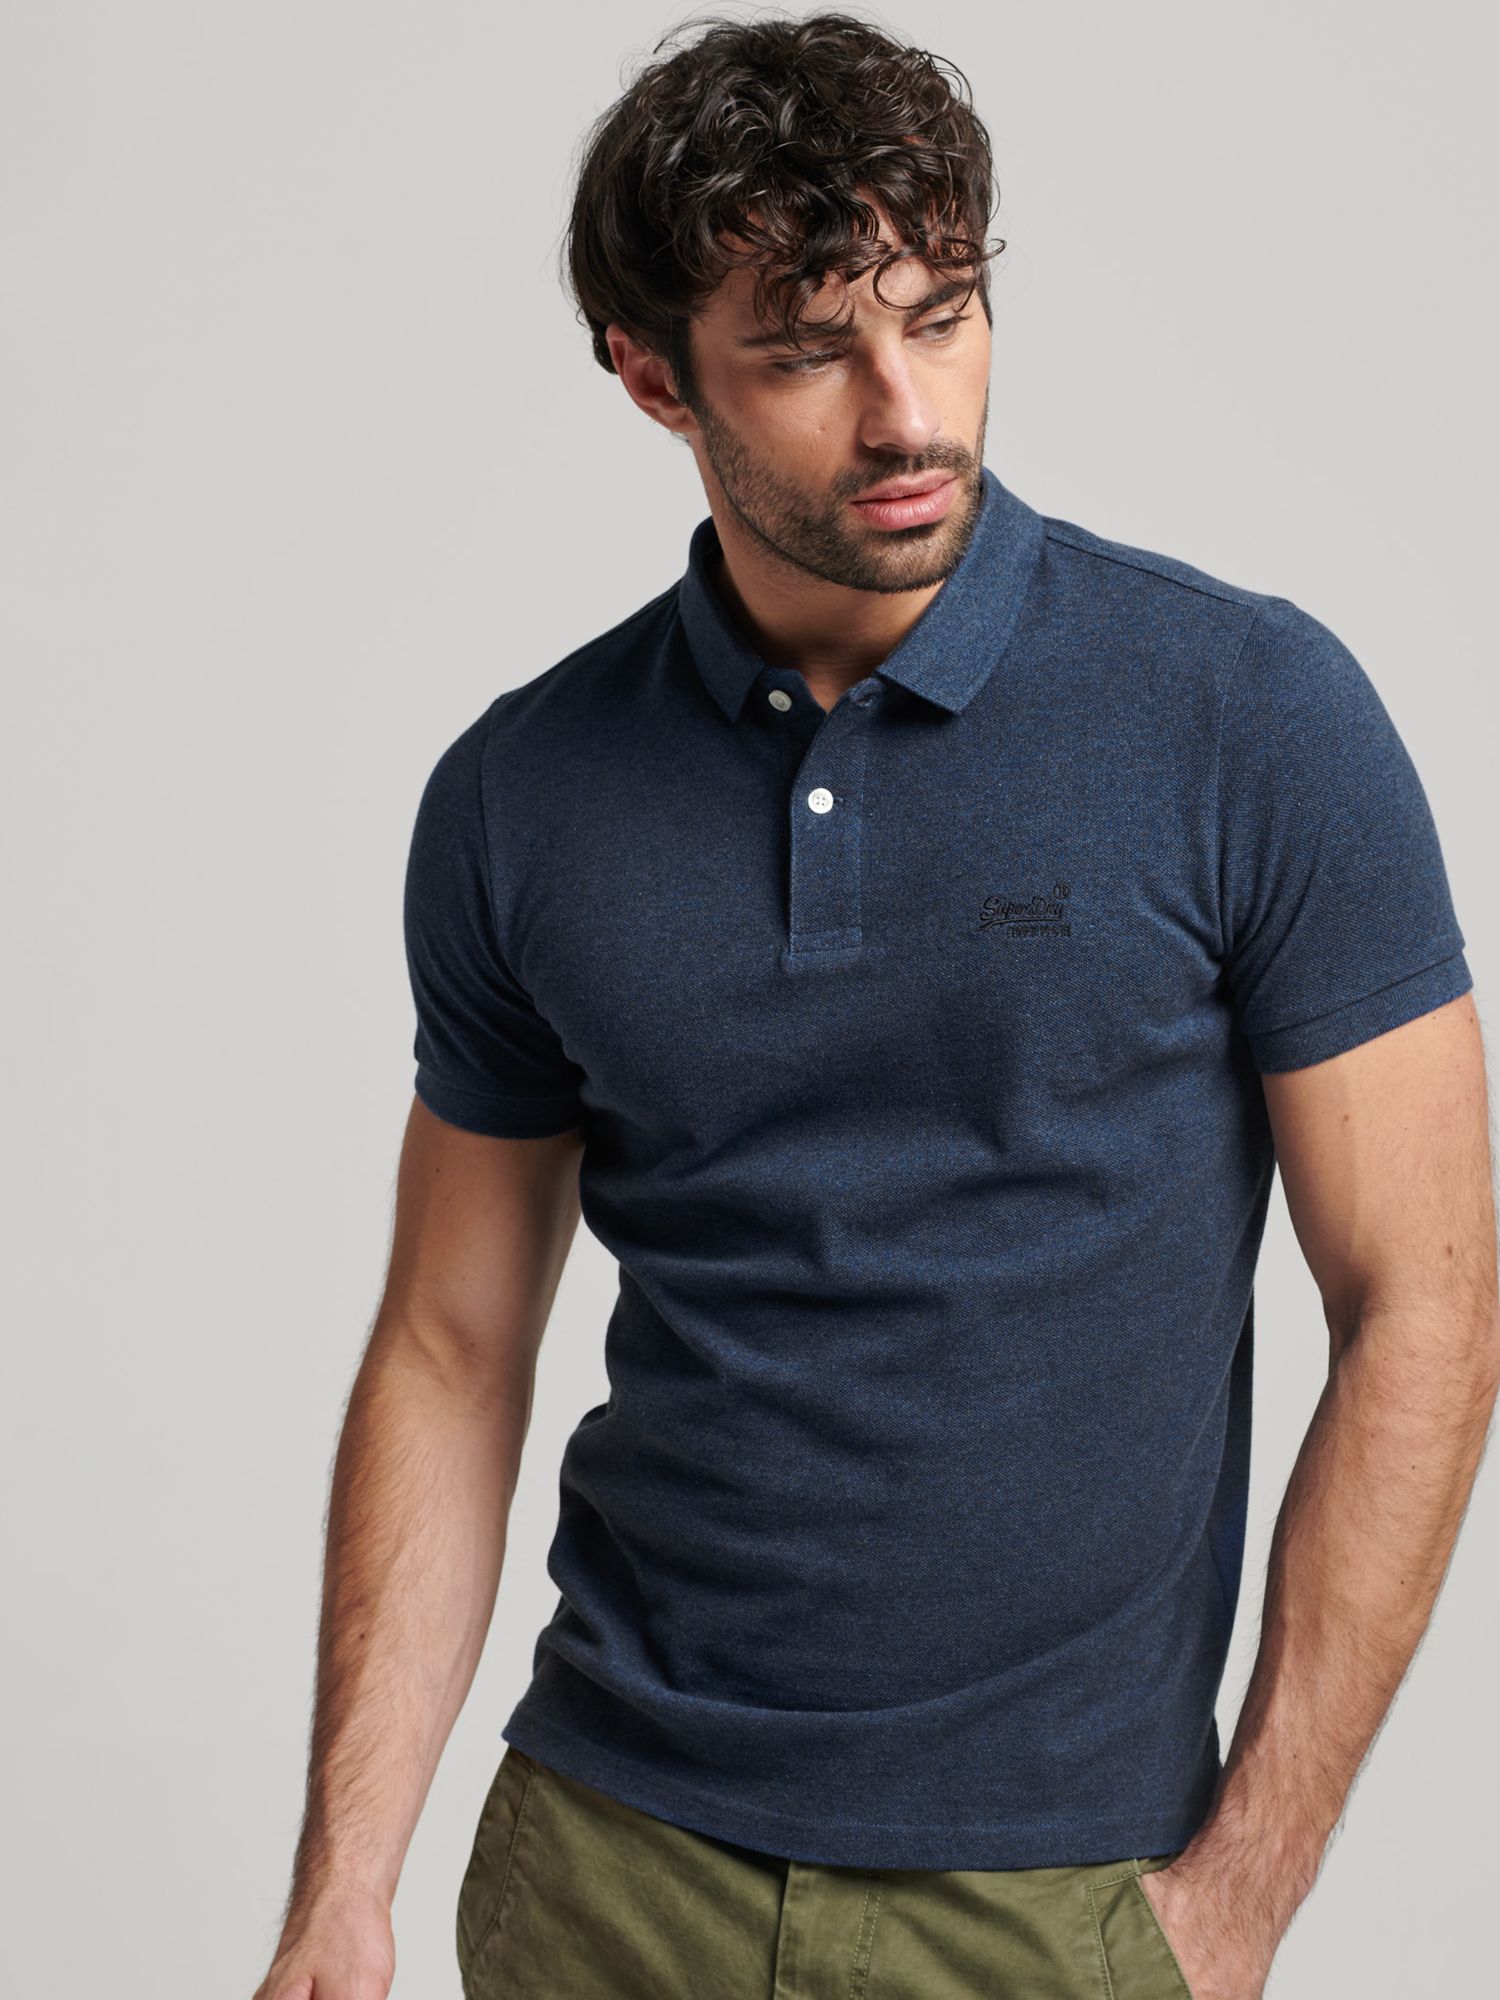 Superdry Classic Blue Lewis at Partners & Polo Pique Shirt, Bright Marl John